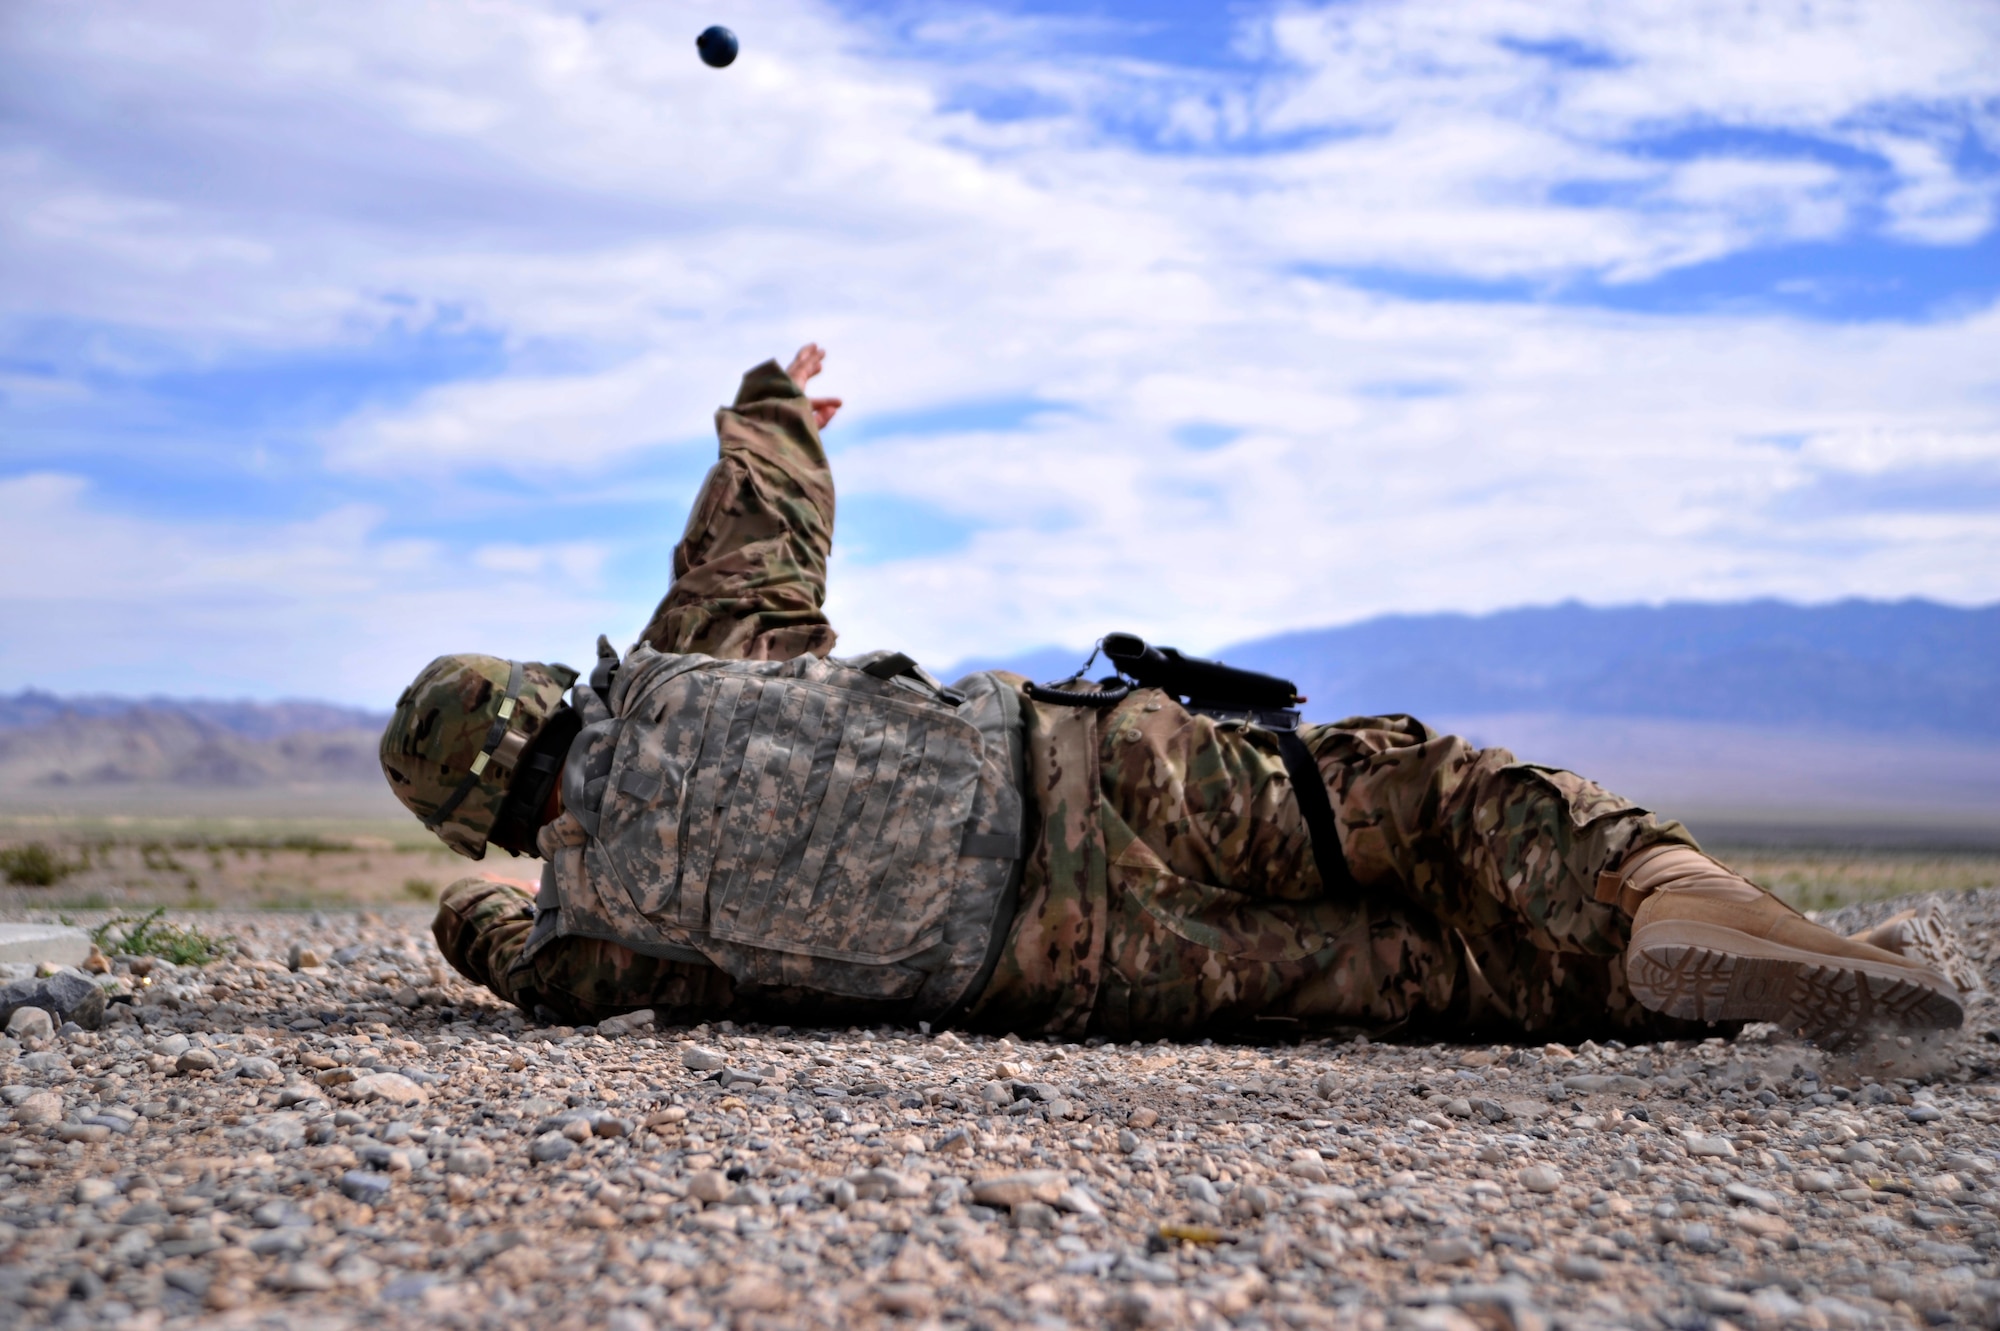 Staff Sgt. David Garcia, 99th Security Forces Squadron evaluator, throws an M-69 practice grenade during the last iteration of the M-67 fragmentation grenade training class Aug. 30, 2014, at Silver Flag Alpha, Nevada. Students completed this course as part of their pre-deployment training in case of an event that requires use of grenades. (U.S. Air Force photo by Airman 1st Class Christian Clausen/Released)